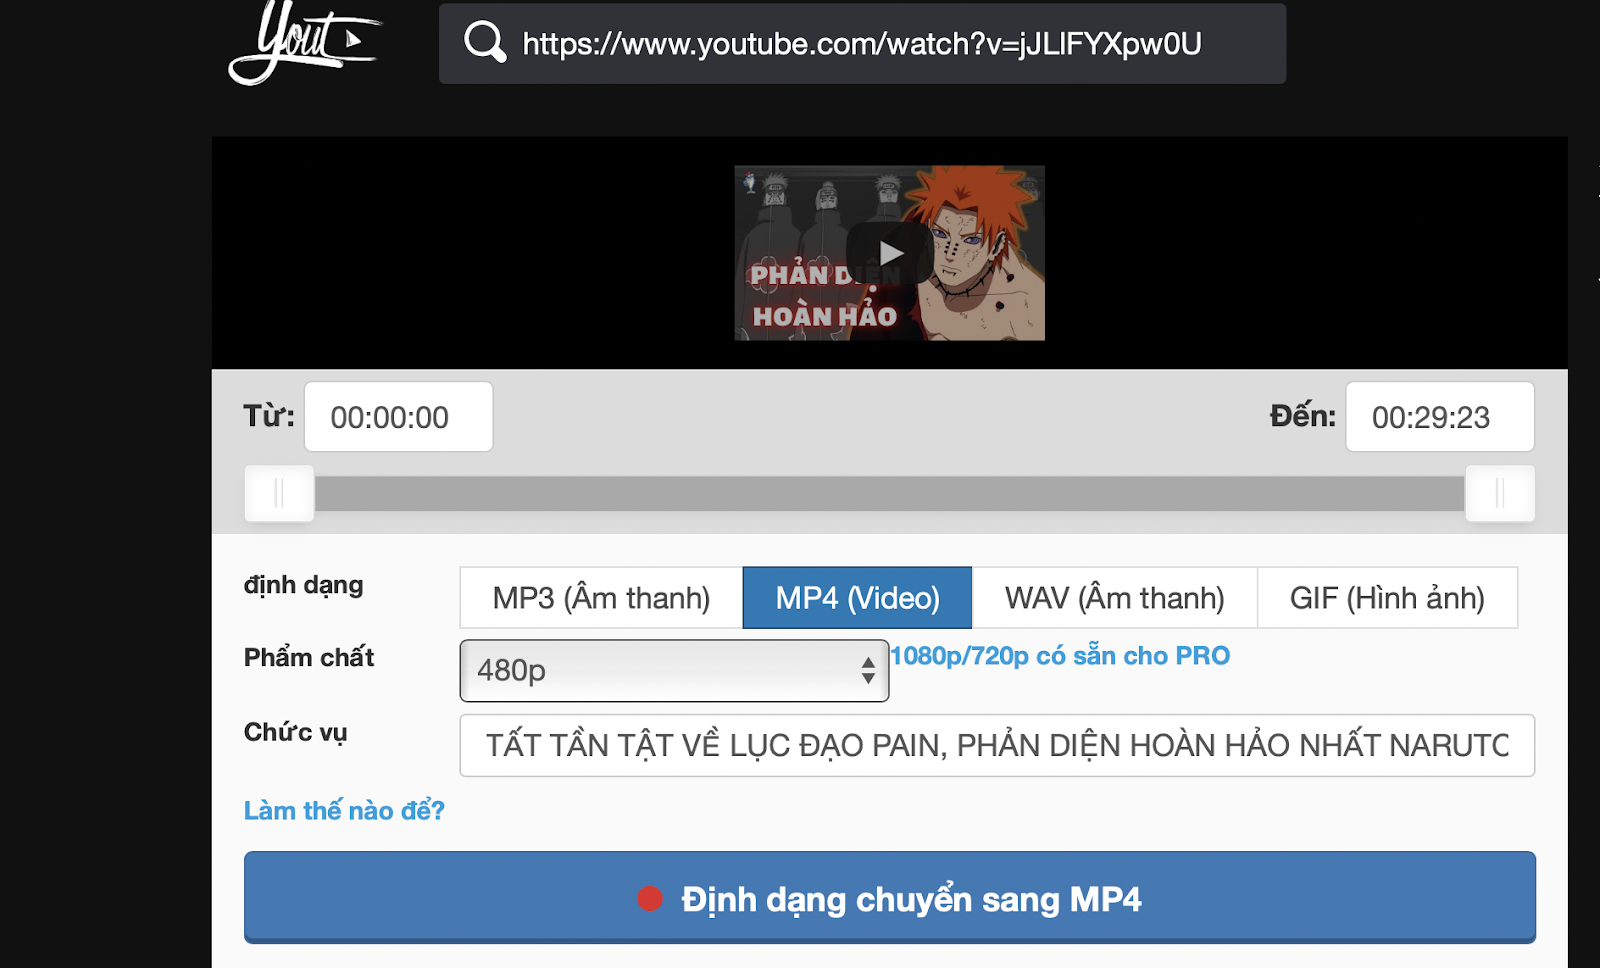 Download video from Youtube cực dễ với Yout